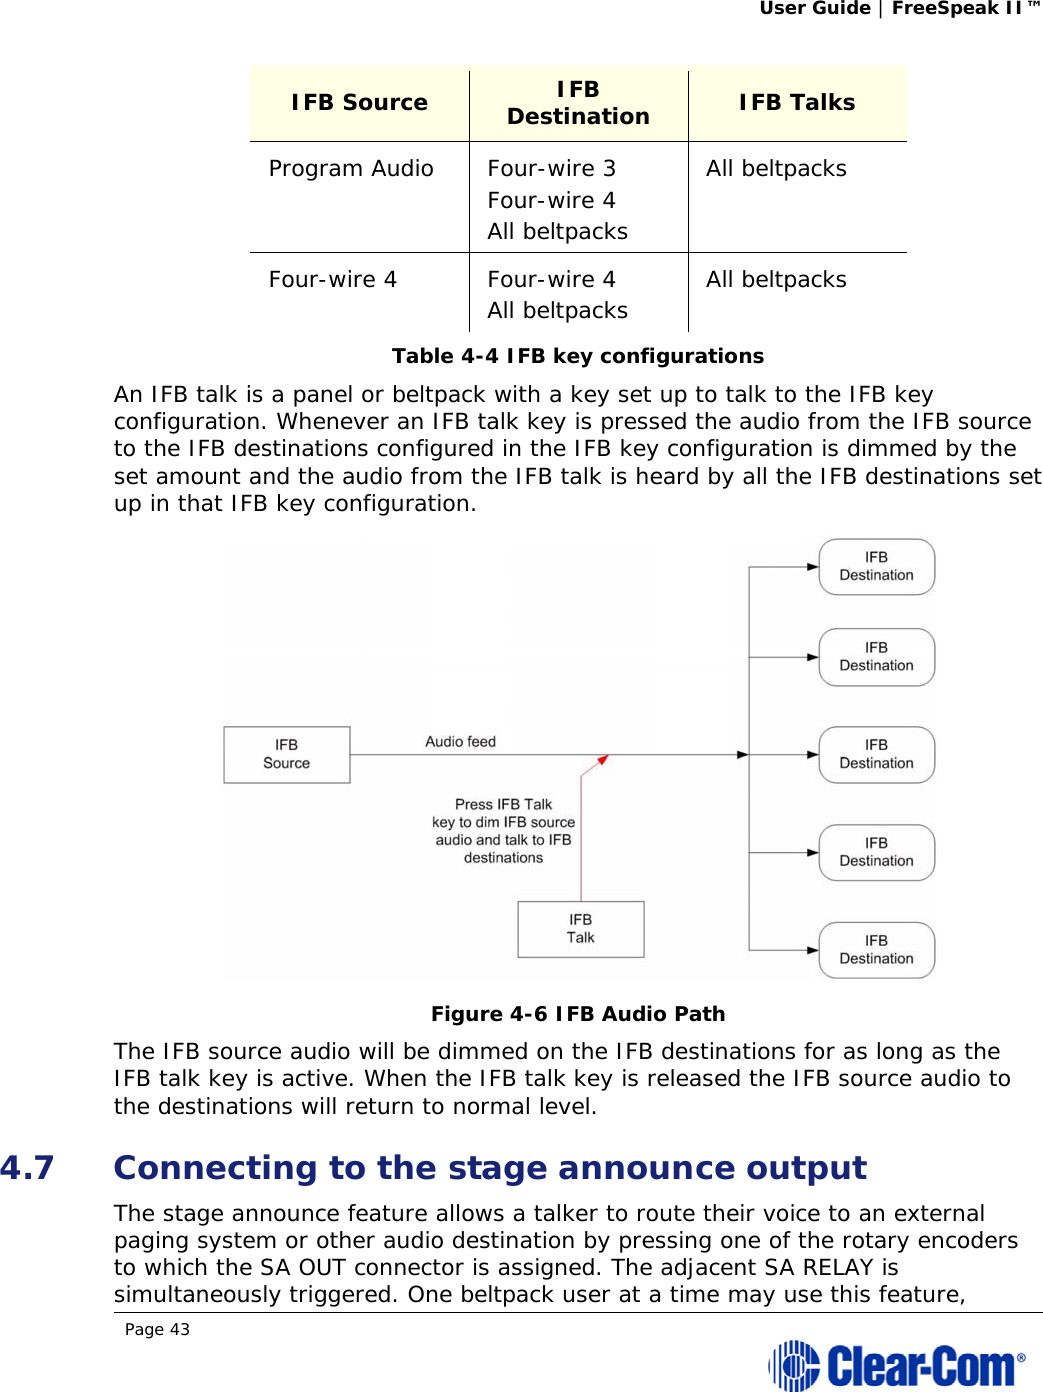 User Guide | FreeSpeak II™  Page 43  IFB Source  IFB Destination  IFB Talks Program Audio  Four-wire 3 Four-wire 4 All beltpacks All beltpacks Four-wire 4  Four-wire 4 All beltpacks  All beltpacks Table 4-4 IFB key configurations An IFB talk is a panel or beltpack with a key set up to talk to the IFB key configuration. Whenever an IFB talk key is pressed the audio from the IFB source to the IFB destinations configured in the IFB key configuration is dimmed by the set amount and the audio from the IFB talk is heard by all the IFB destinations set up in that IFB key configuration.  Figure 4-6 IFB Audio Path The IFB source audio will be dimmed on the IFB destinations for as long as the IFB talk key is active. When the IFB talk key is released the IFB source audio to the destinations will return to normal level. 4.7 Connecting to the stage announce output The stage announce feature allows a talker to route their voice to an external paging system or other audio destination by pressing one of the rotary encoders to which the SA OUT connector is assigned. The adjacent SA RELAY is simultaneously triggered. One beltpack user at a time may use this feature, 